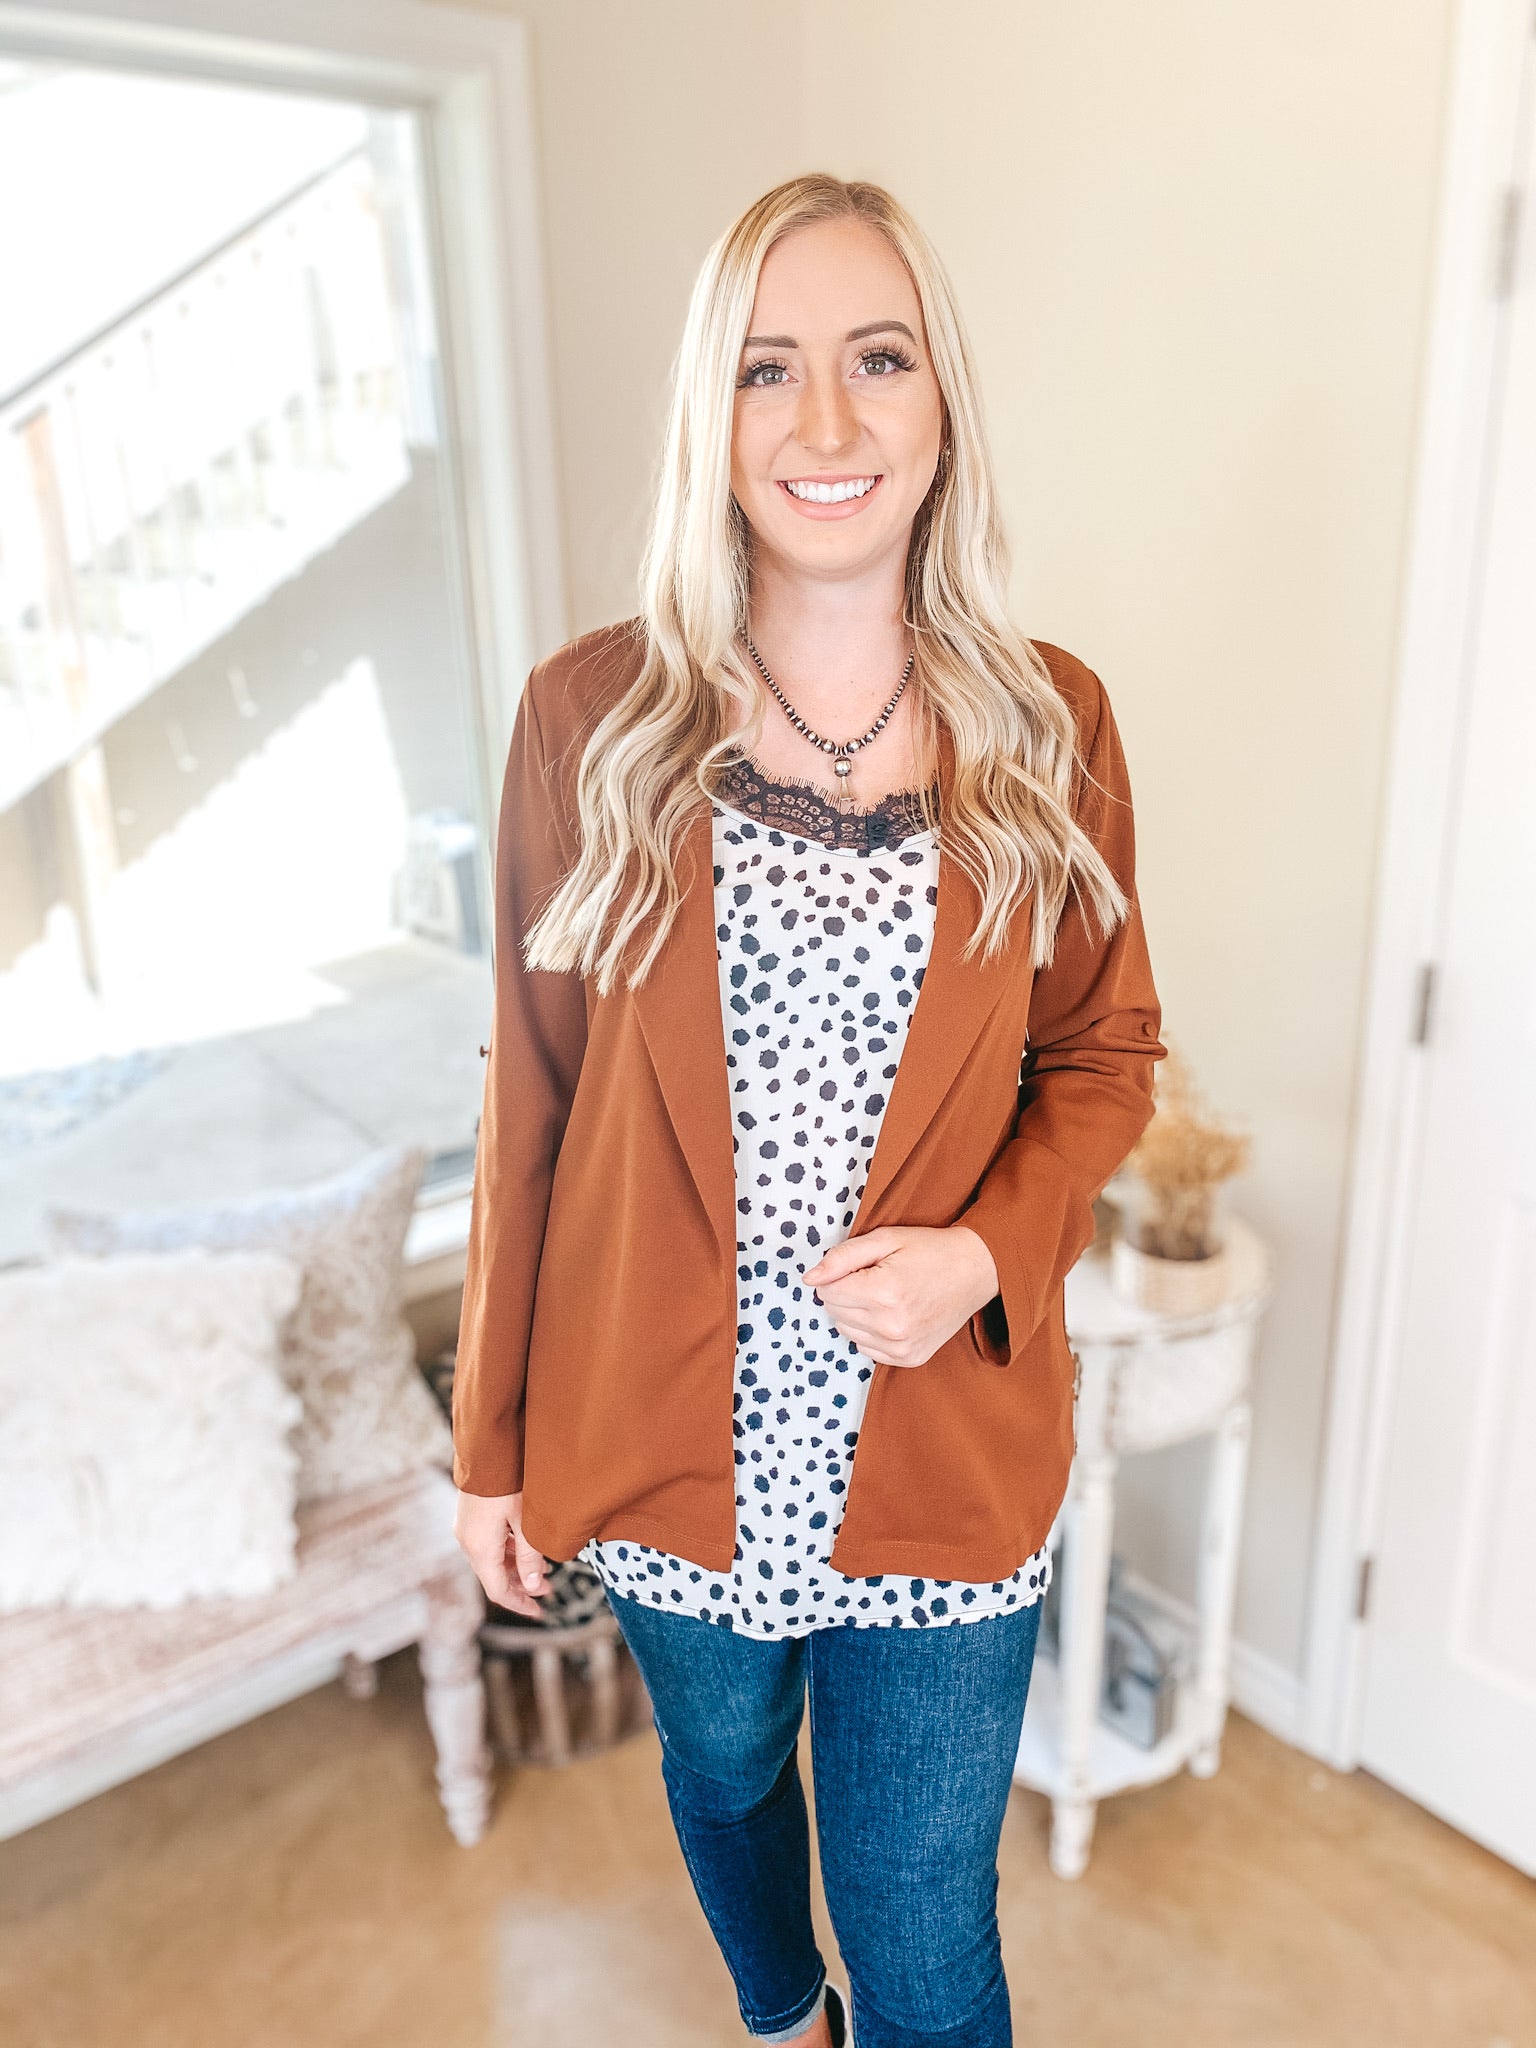 Legally Blonde 3/4 Sleeve Open Front Collared Blazer in Chestnut Brown - Giddy Up Glamour Boutique